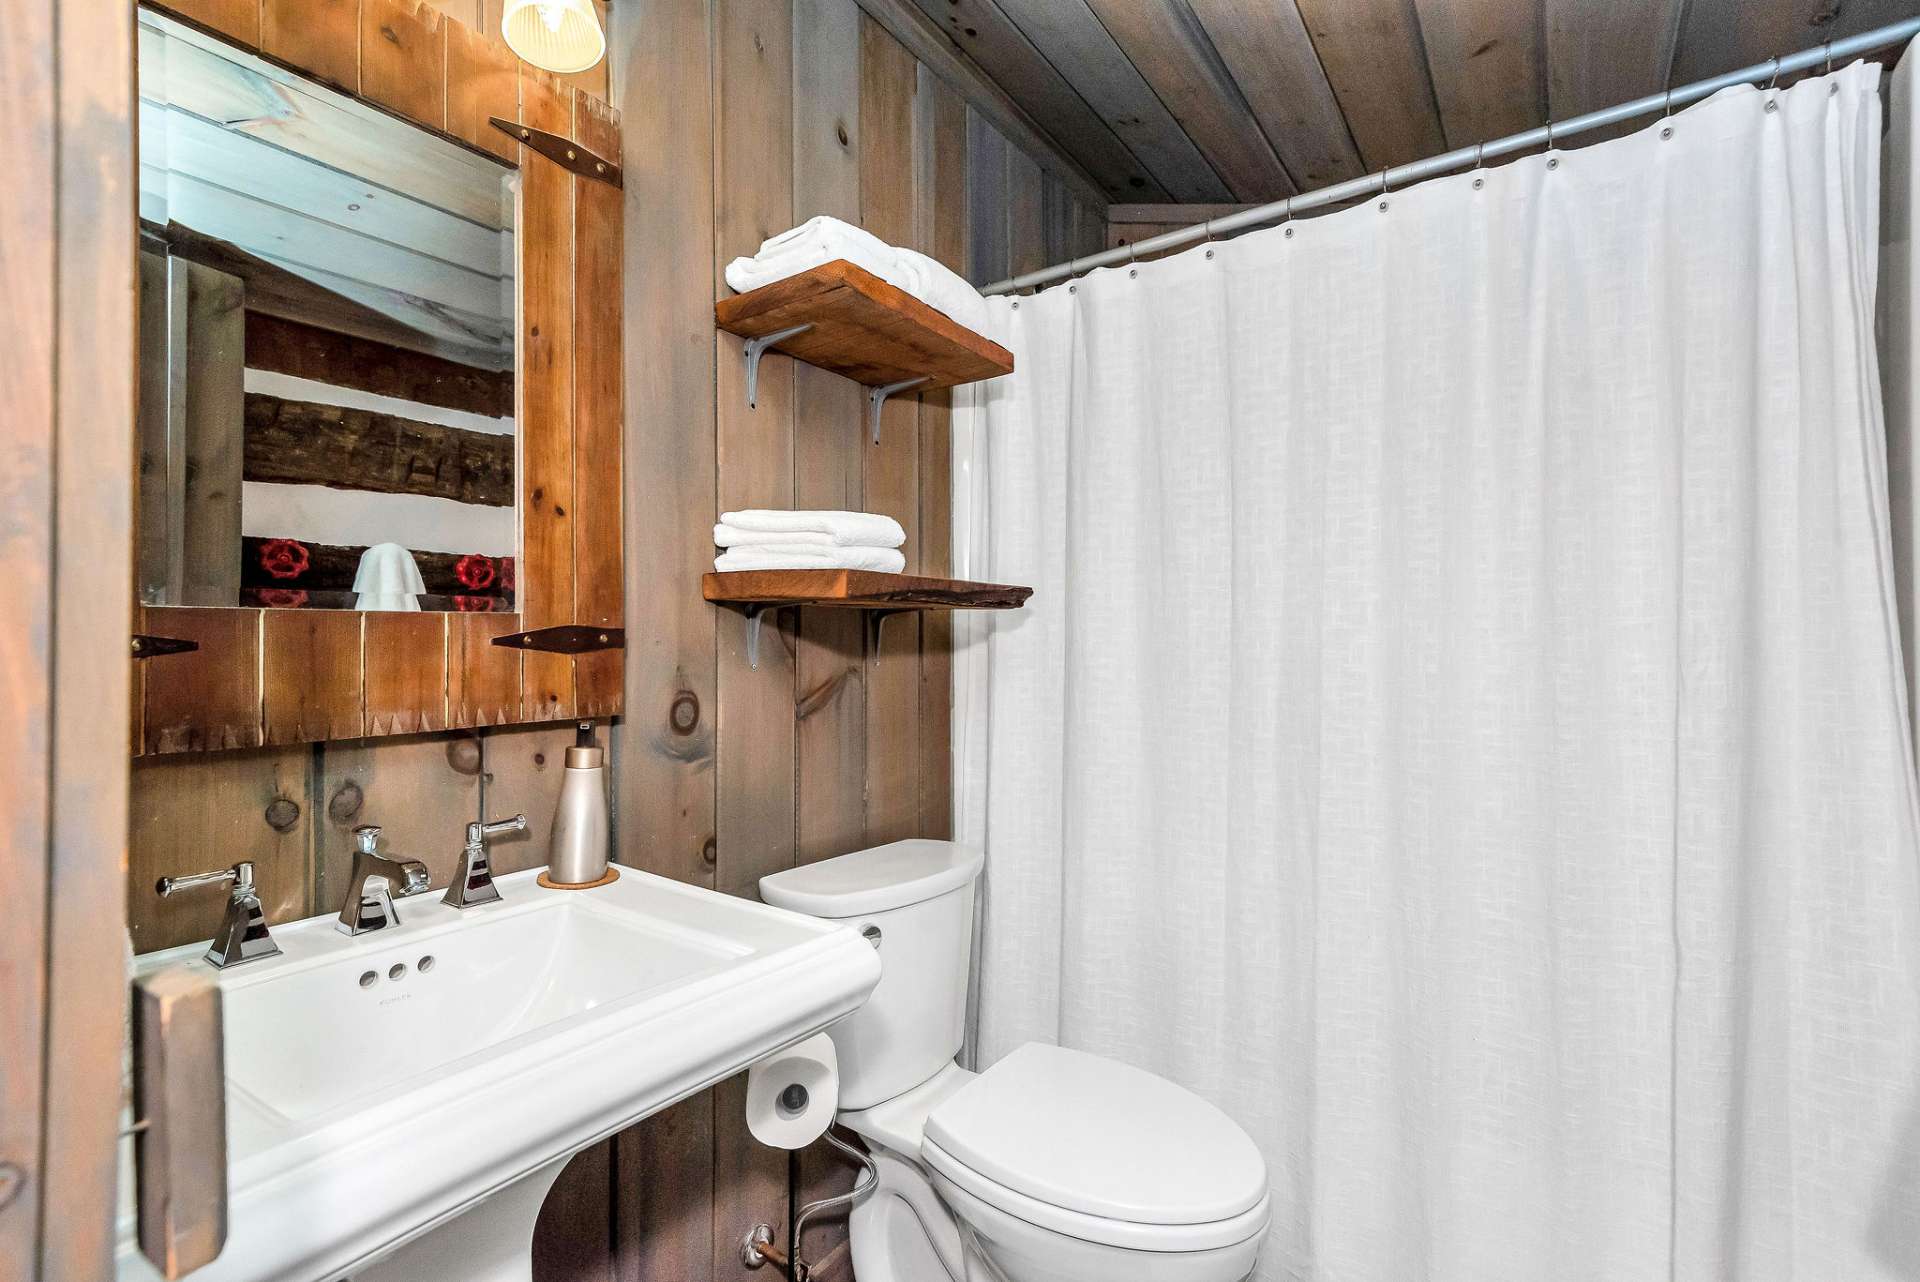 The full bath in the loft bedroom is a charming and functional space that offers convenience and comfort within the cozy confines of the cabin's upper level. The tub/shower combination provides versatility for occupants who prefer either a quick shower or a relaxing soak in the tub.